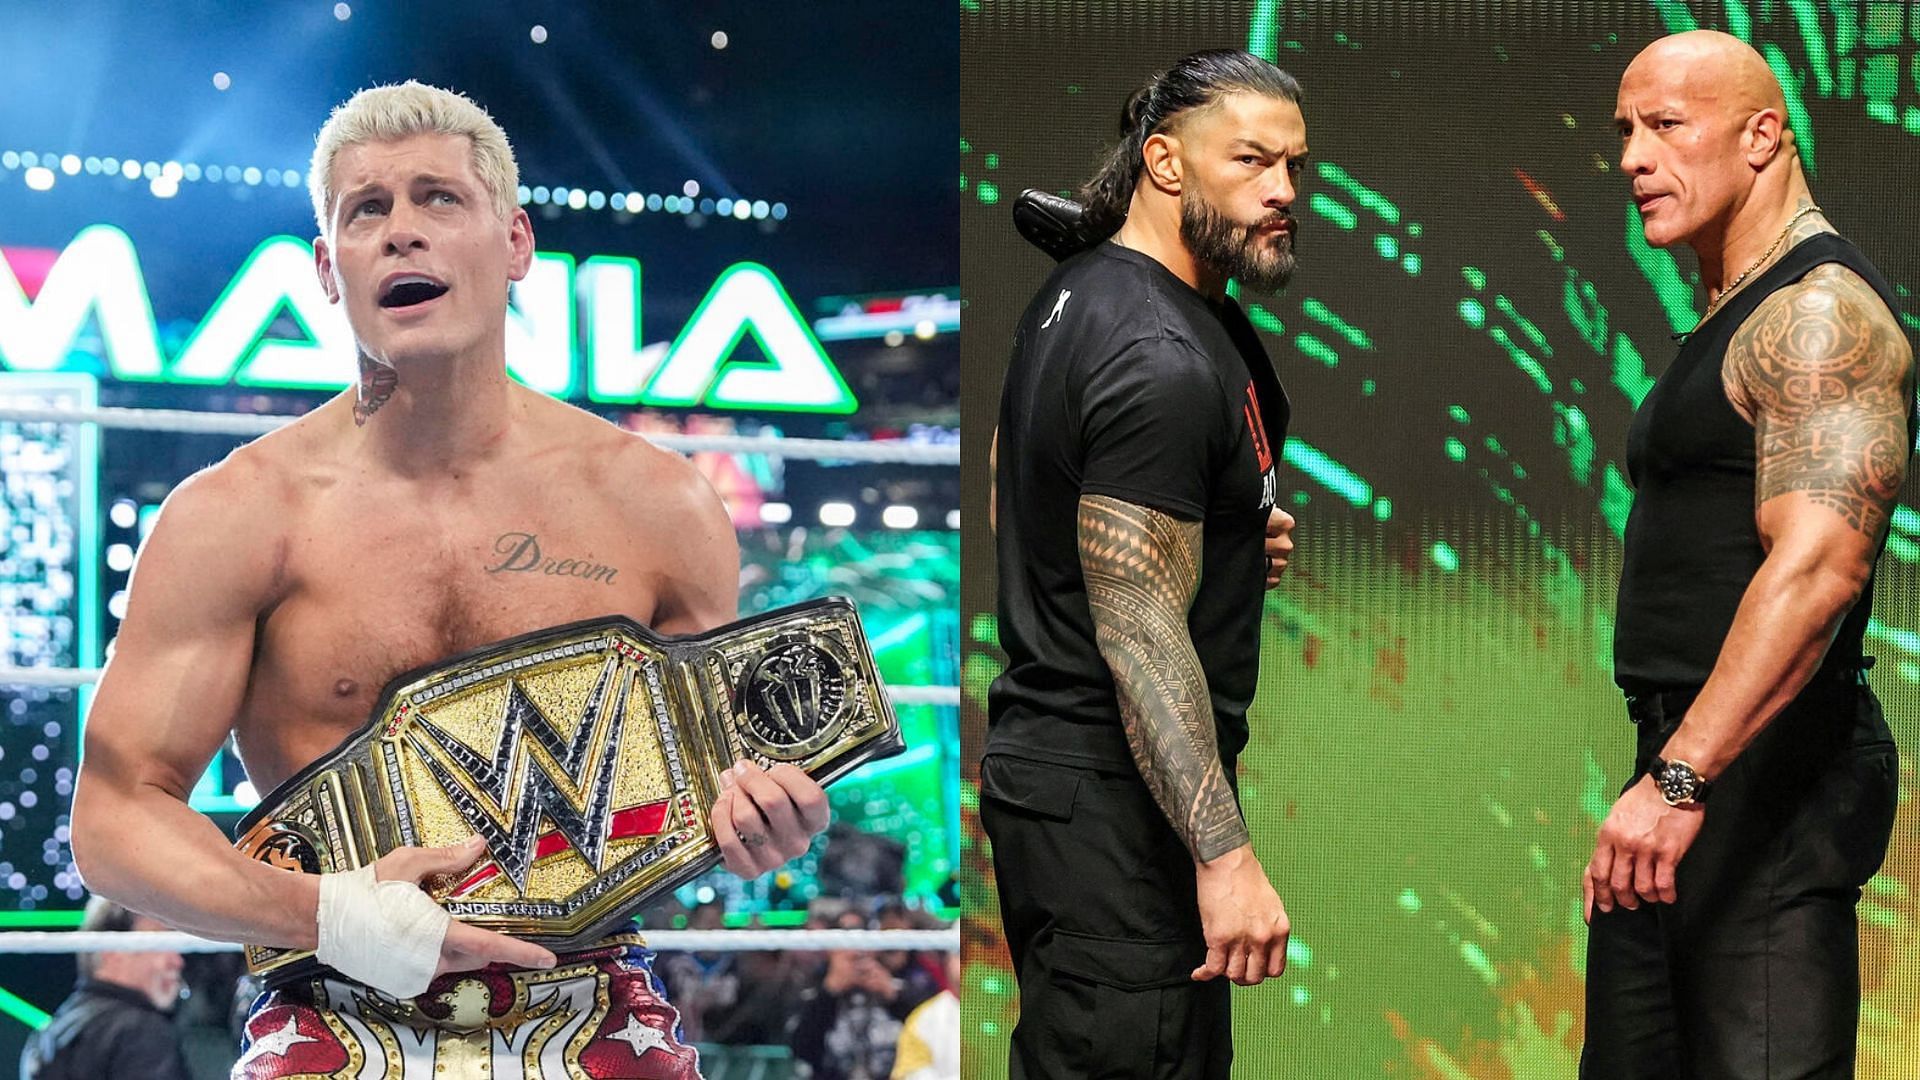 Cody Rhodes lost to Roman Reigns and The Rock at WrestleMania XL Saturday!